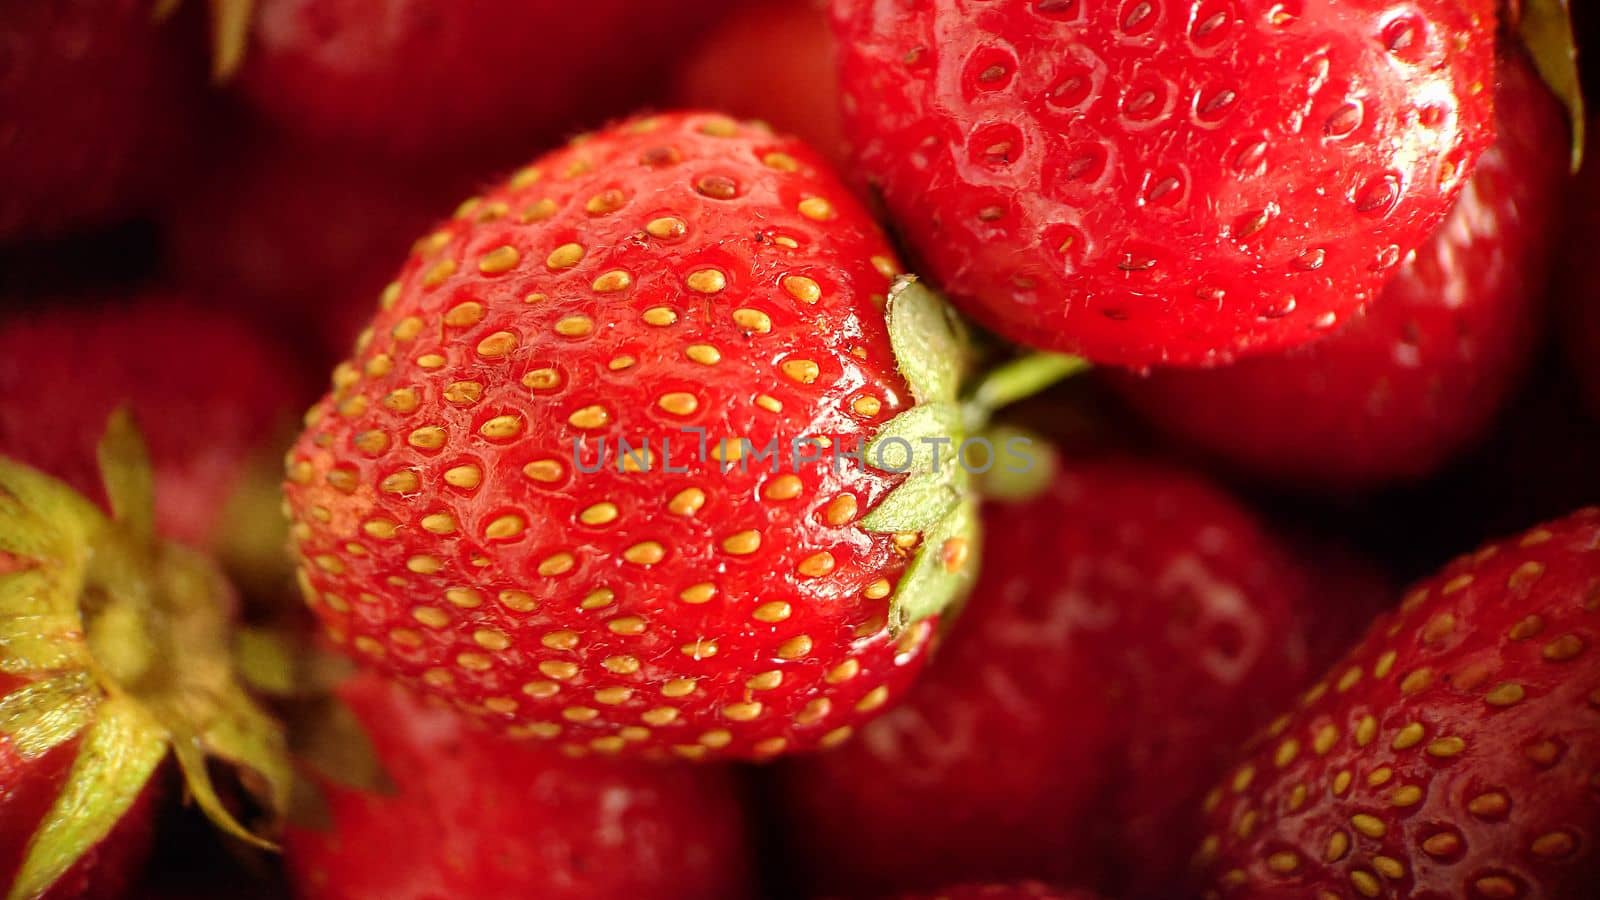 Juicy ripe strawberry berry selective focus close-up by Mastak80